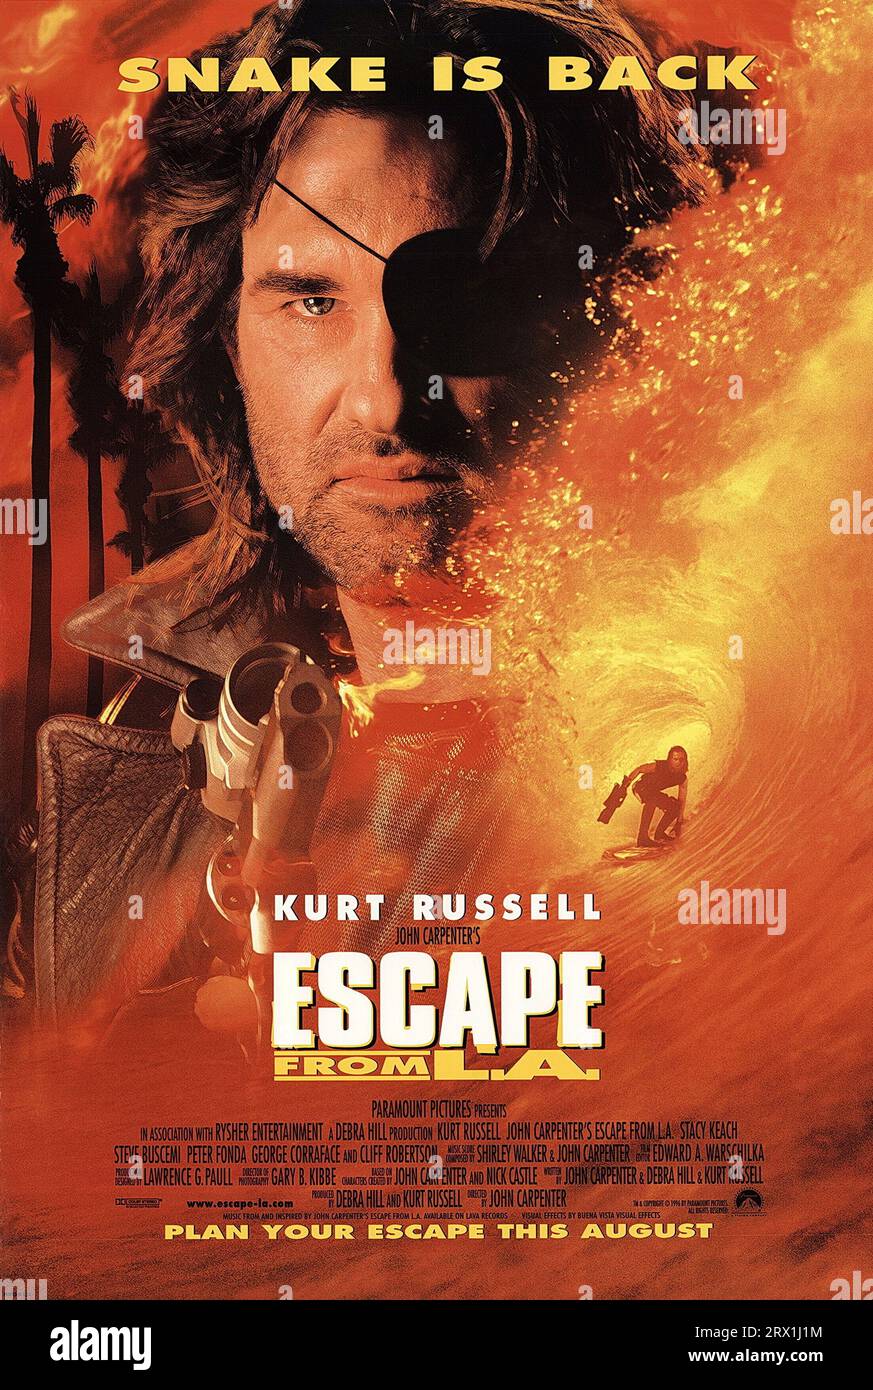 ESCAPE FROM L. A. (1996), directed by JOHN CARPENTER. Credit: PARAMOUNT PICTURES/RYSHER ENTERTAINMENT / Album Stock Photo